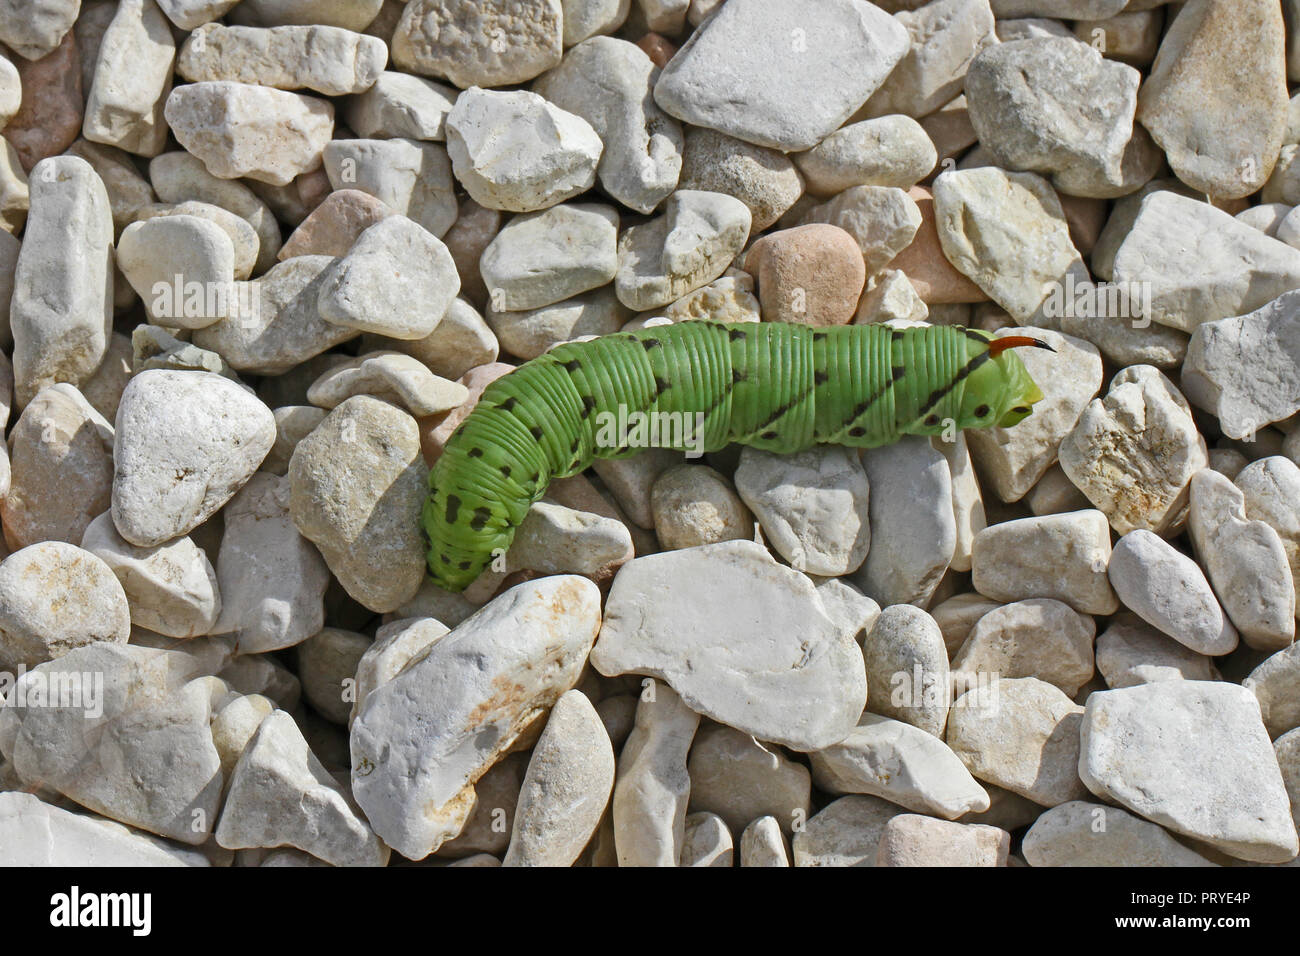 Tomato hornworm Latin manduca quinquemaculata in Italy similar to a tobacco hornworm Latin manduca sexta but that species isn't native to Italy Stock Photo